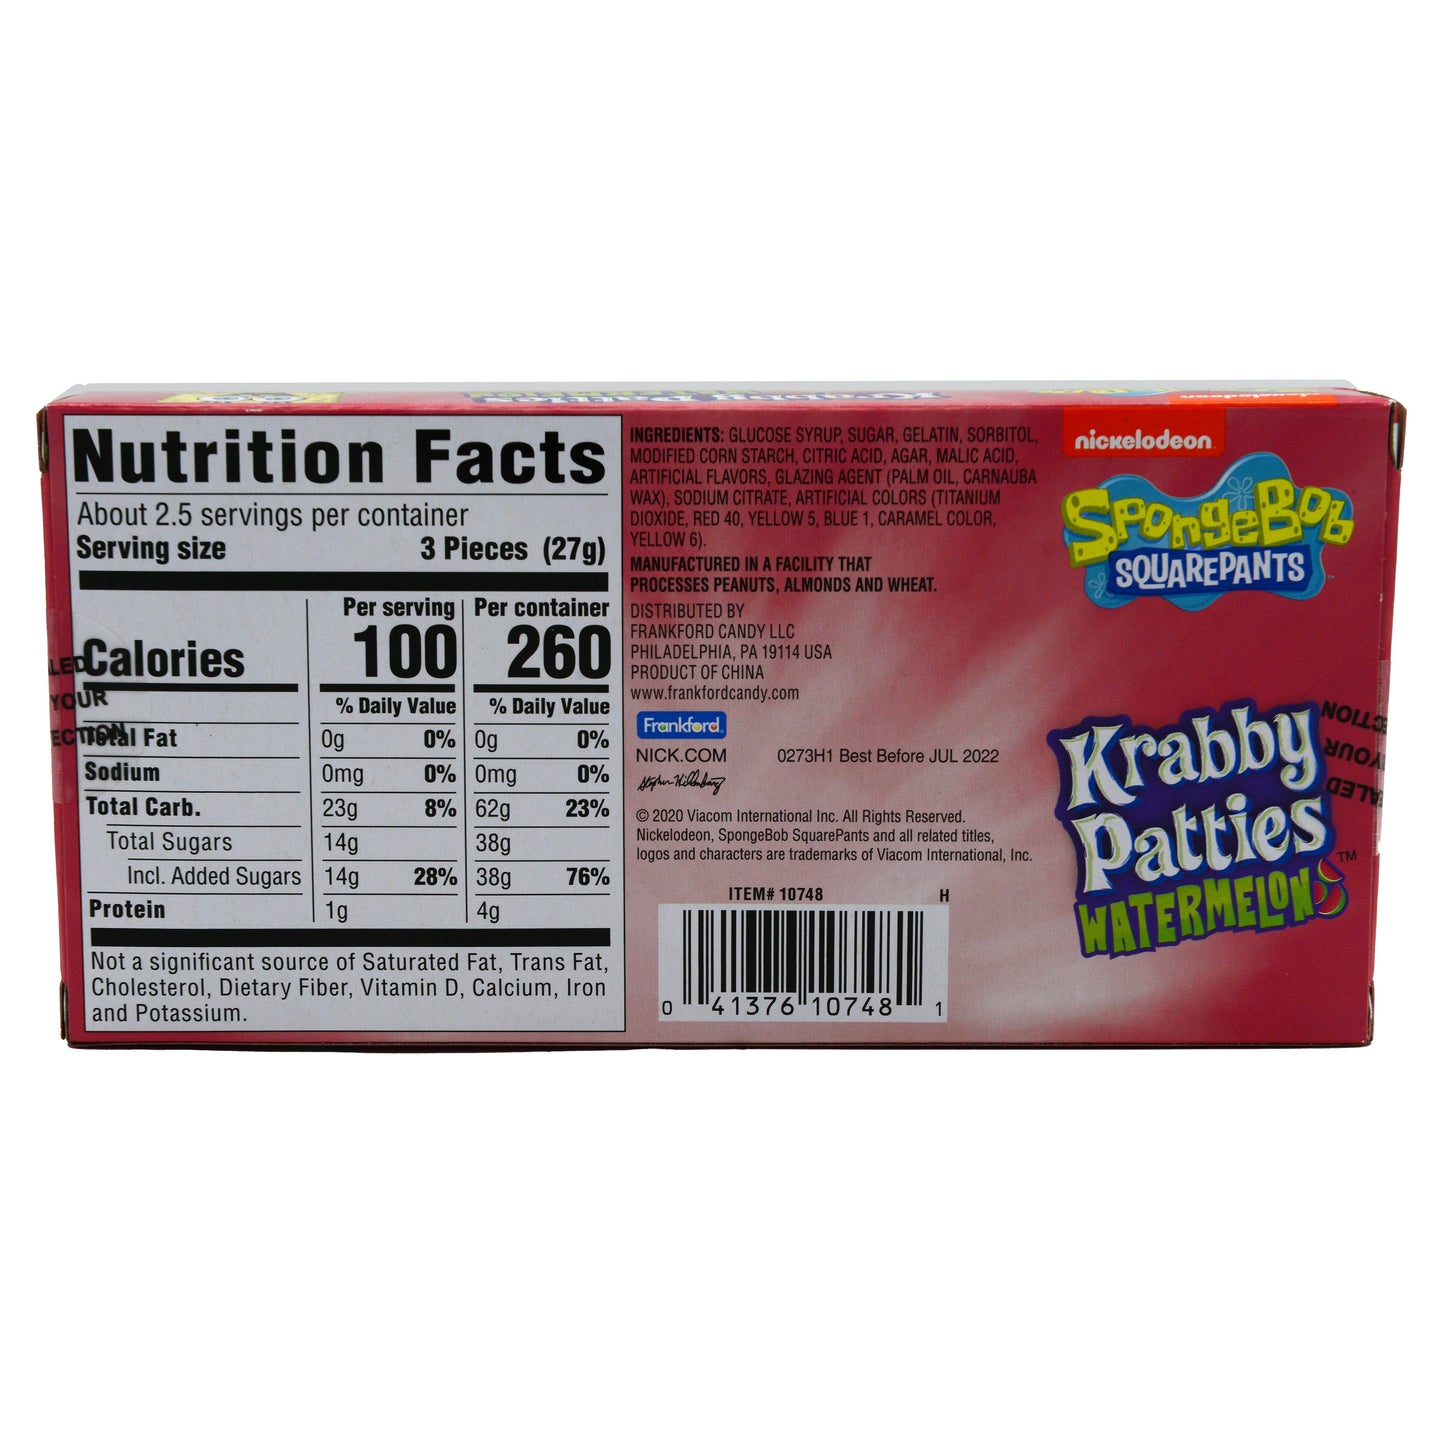 back view of the Krabby Patty Watermelon gummy candy packaging